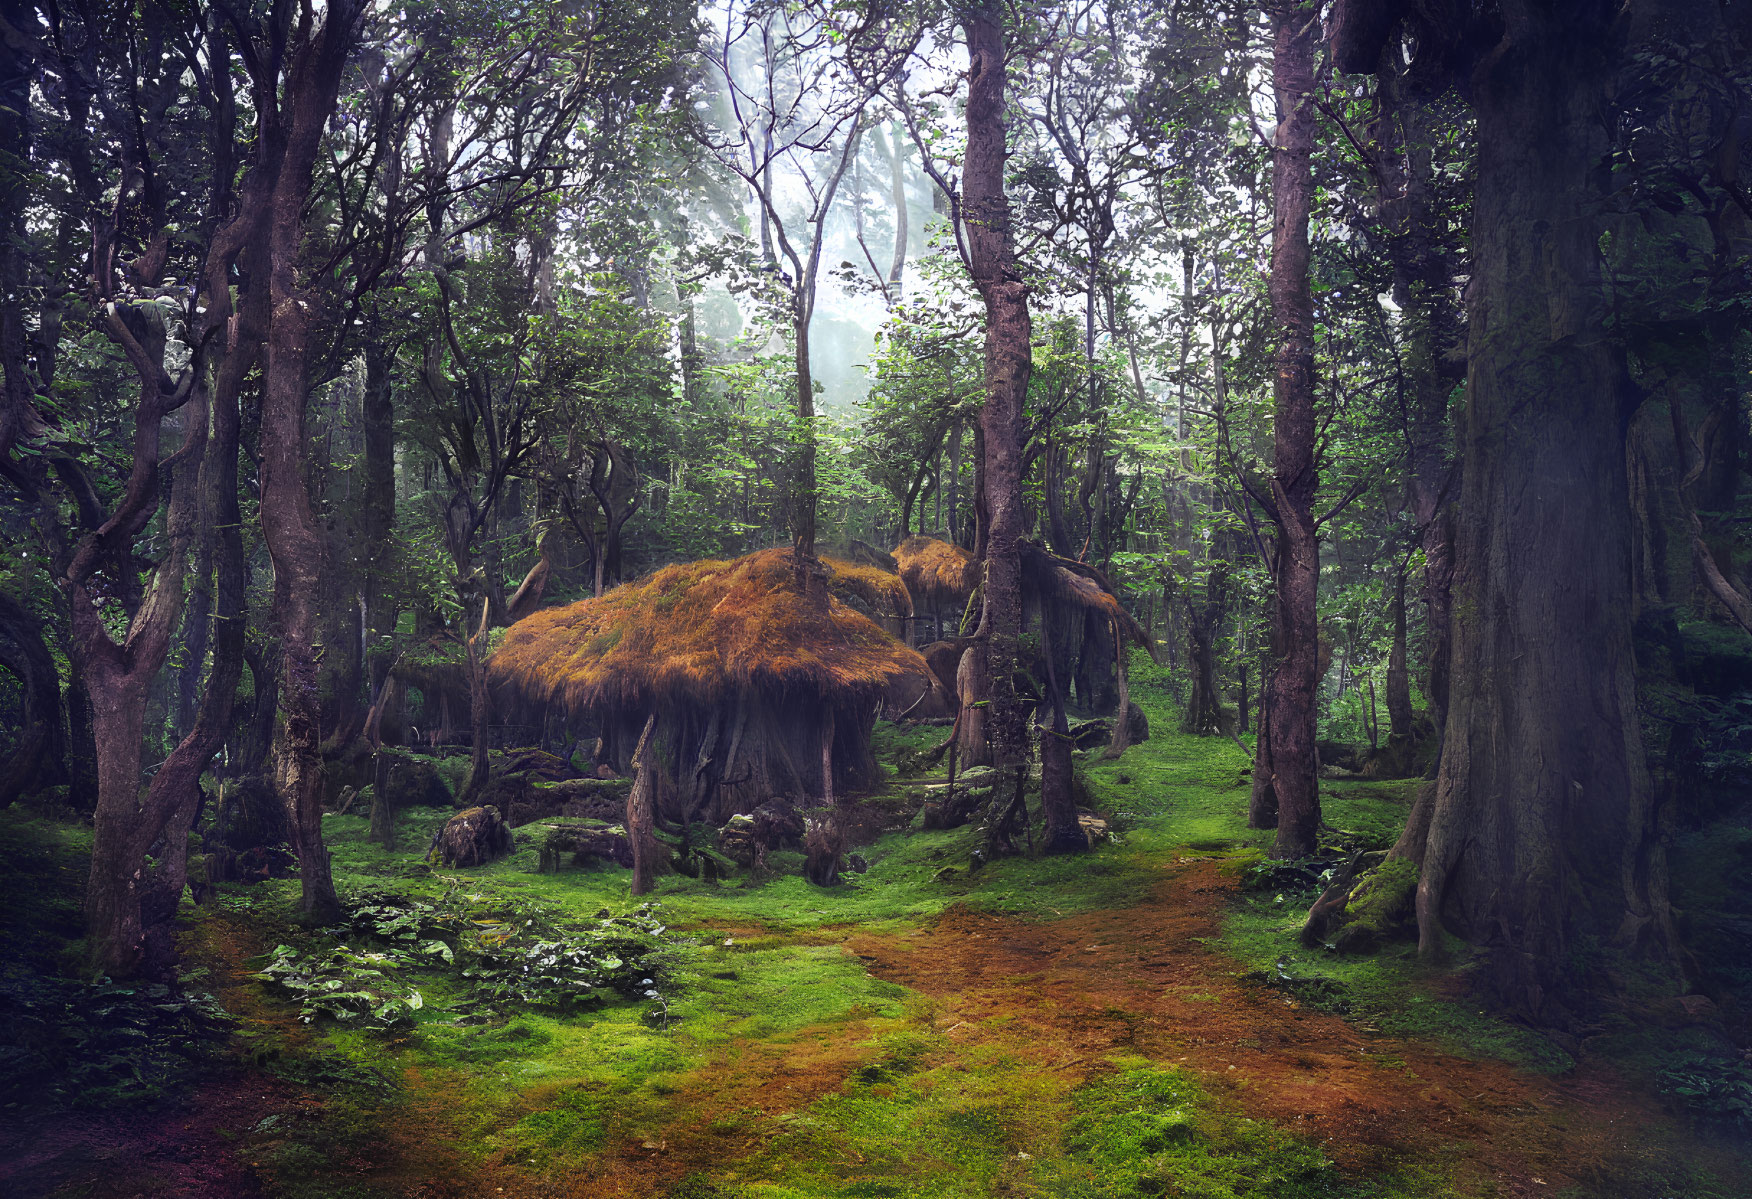 Enchanting forest with dense trees, mossy floor, and foggy atmosphere